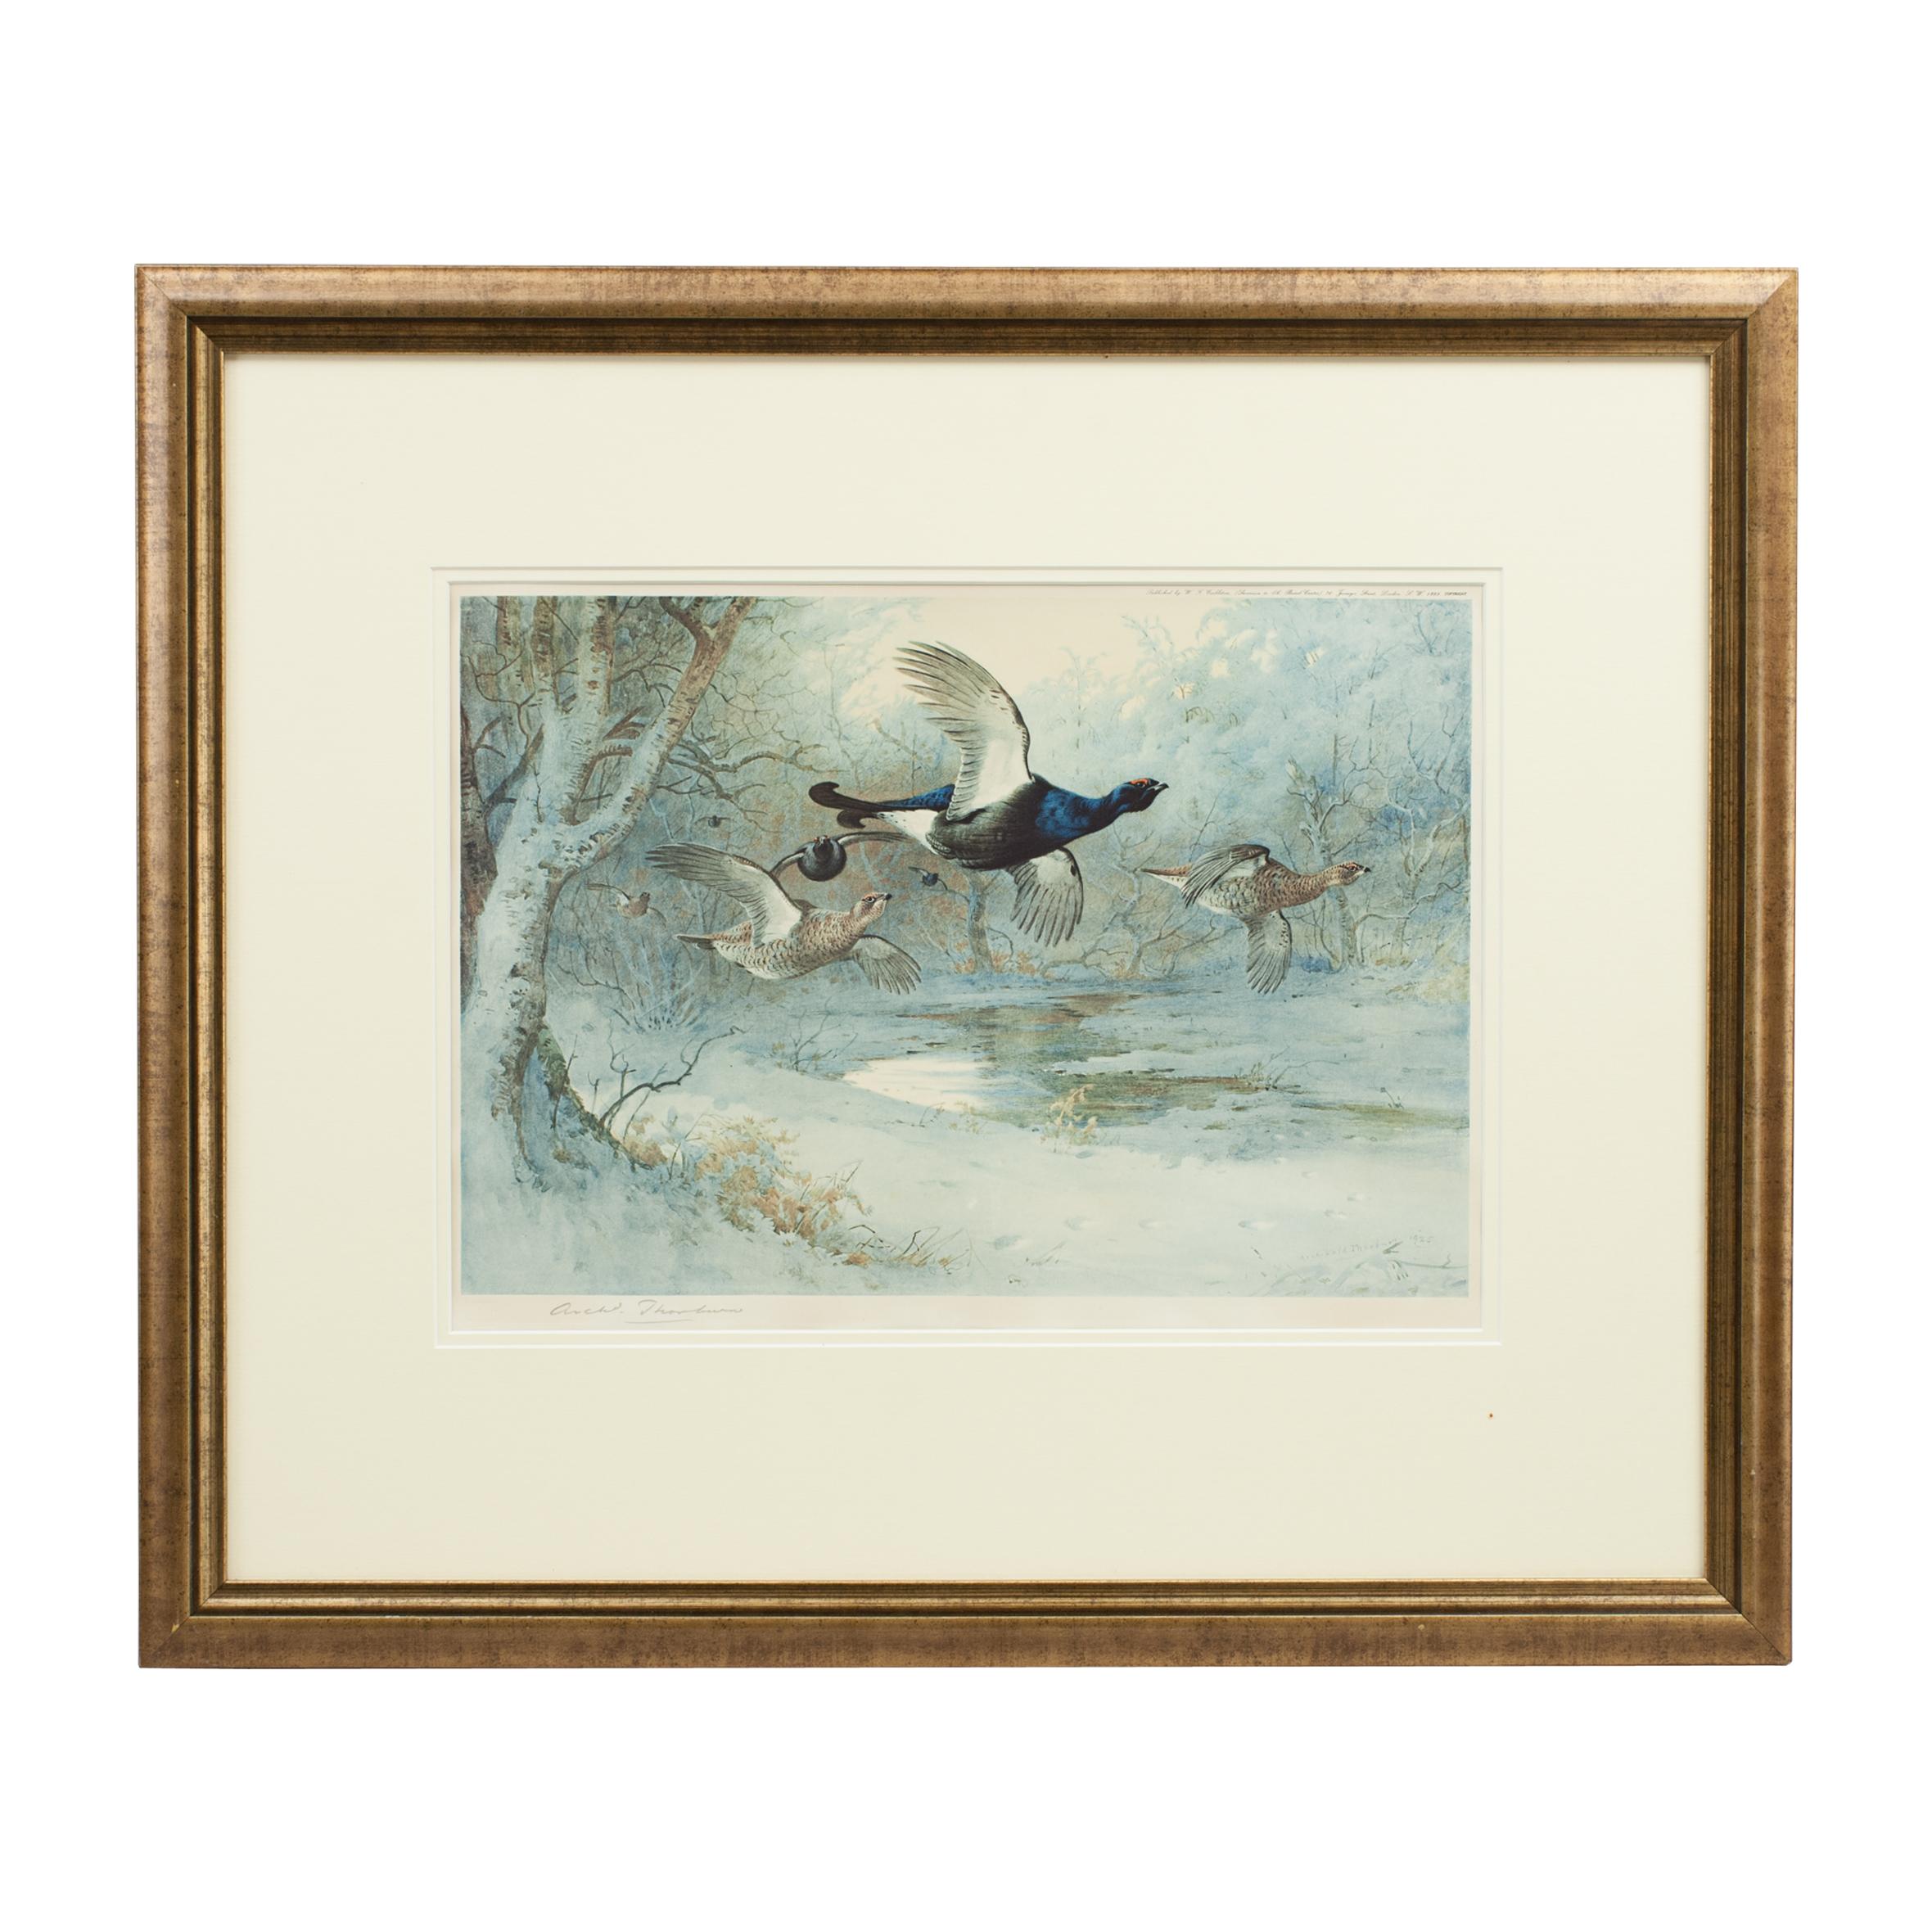 Antique Shooting Print, Game Birds by Archibald Thorburn, Winter, Pub, 1925